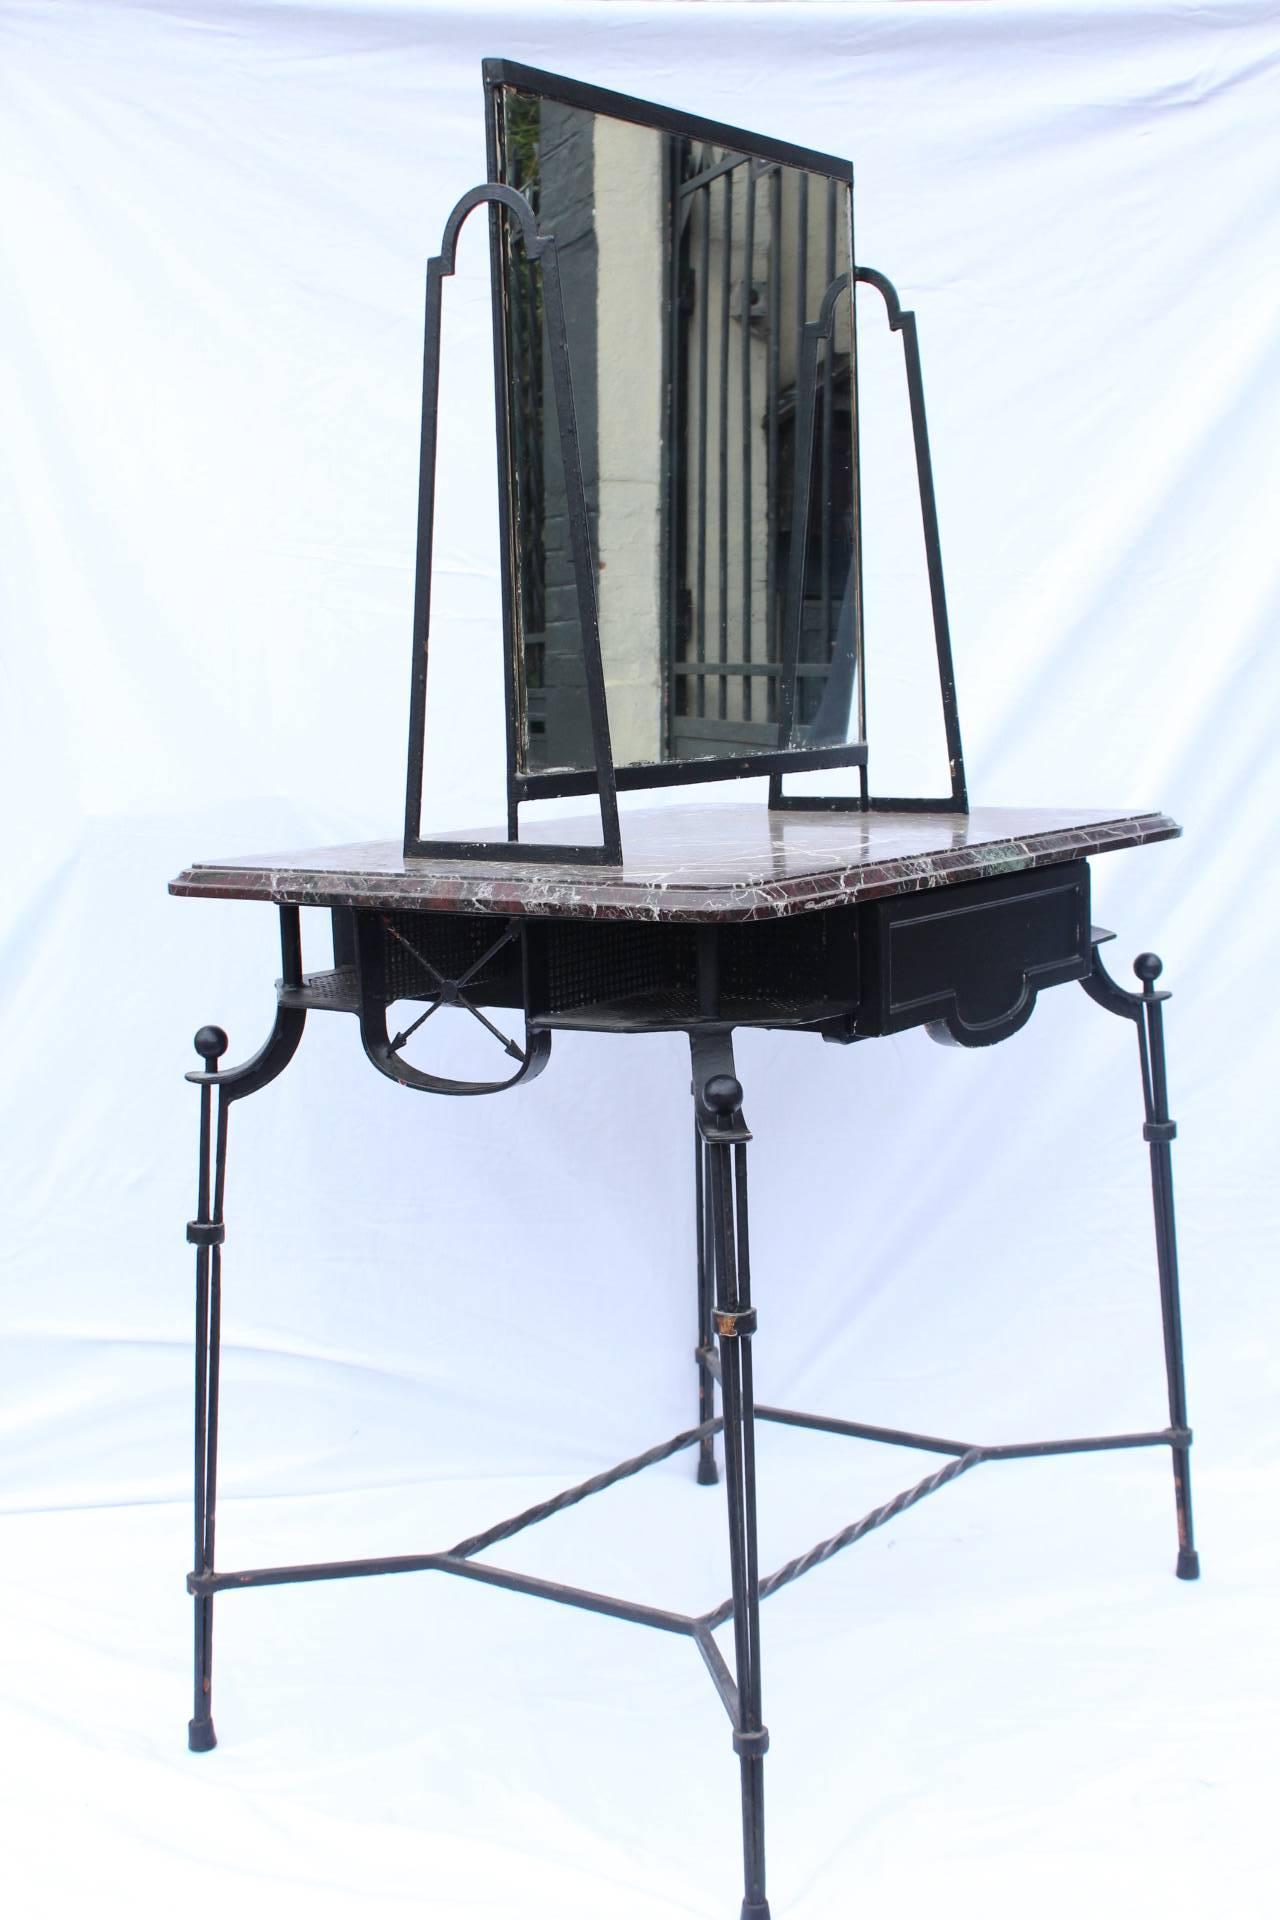 This double-sided hairdresser was made in France during the 1940's. 
The work on the metal and the decorative details, such as the arrows and the design of the base are very fine and typical from the period. The marble gives an elegant touch. 
A